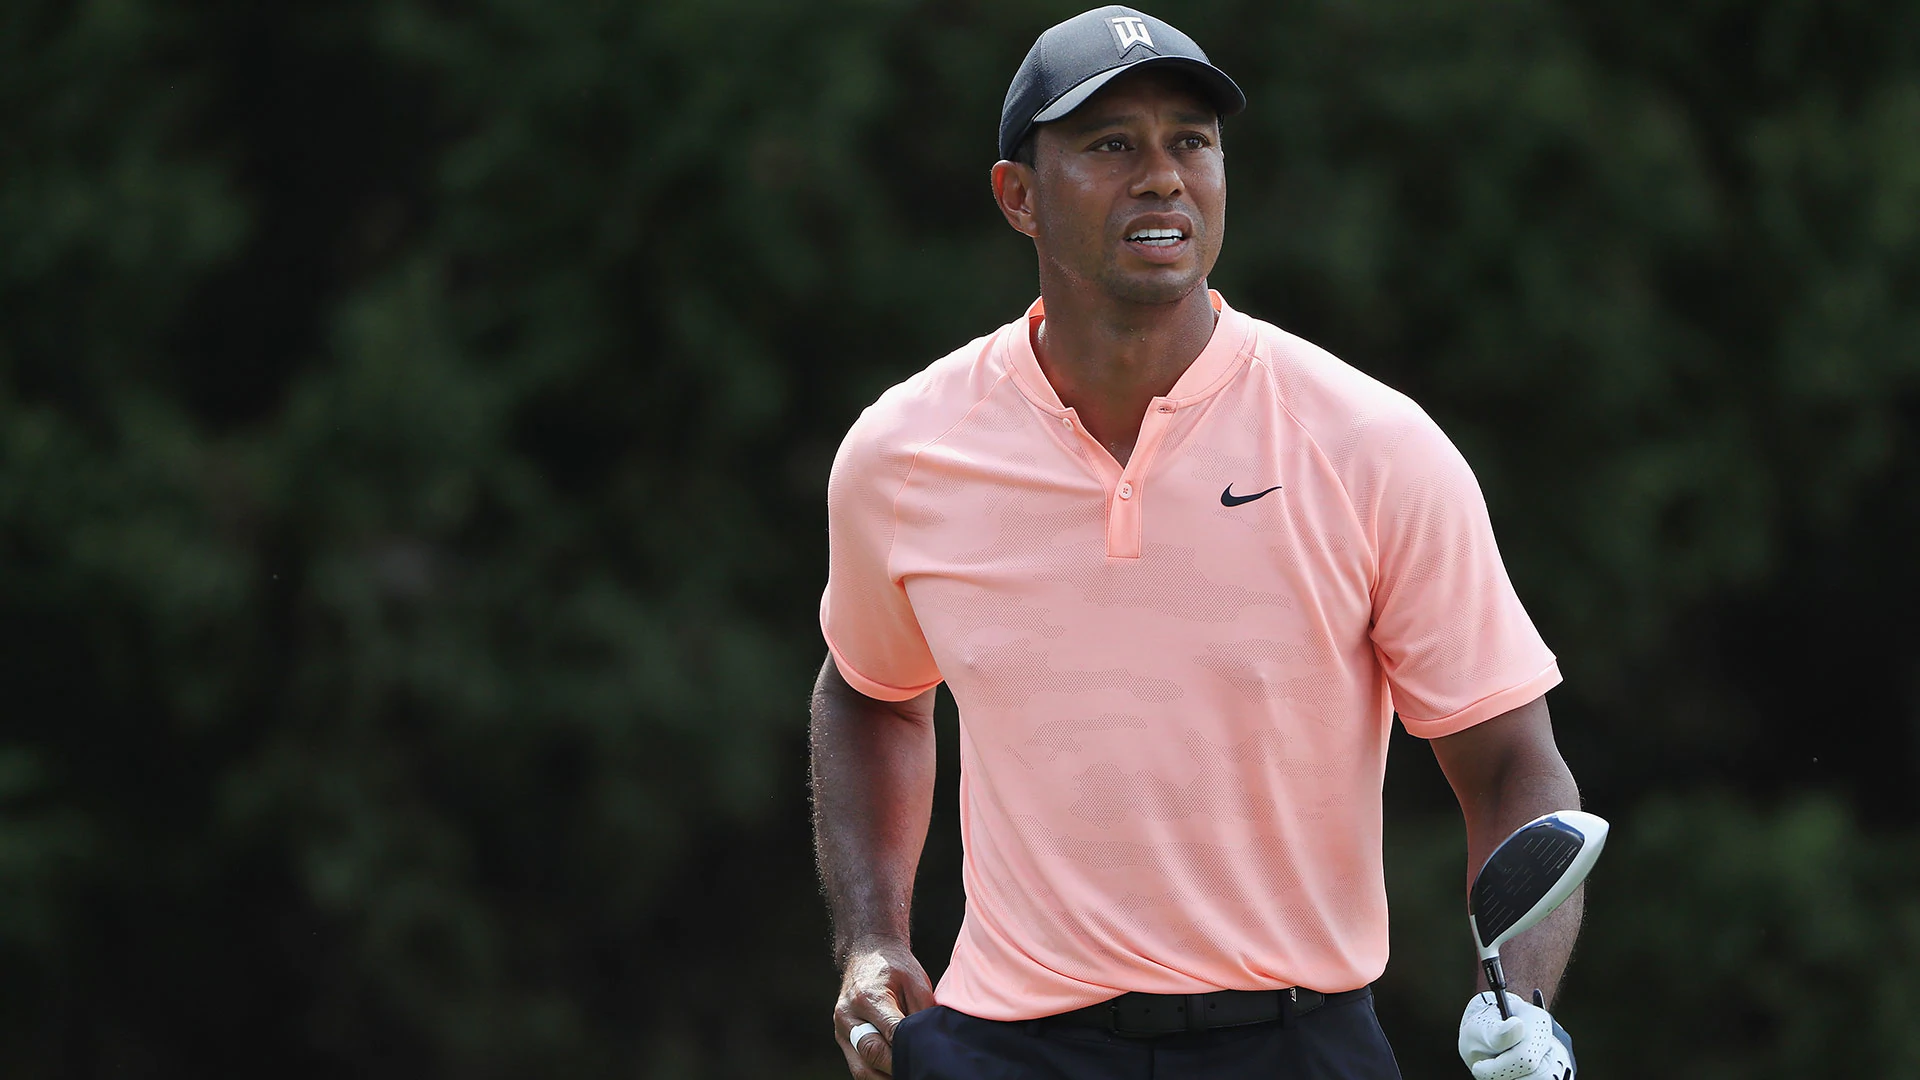 Watch: Highlights from Tiger's first round at East Lake